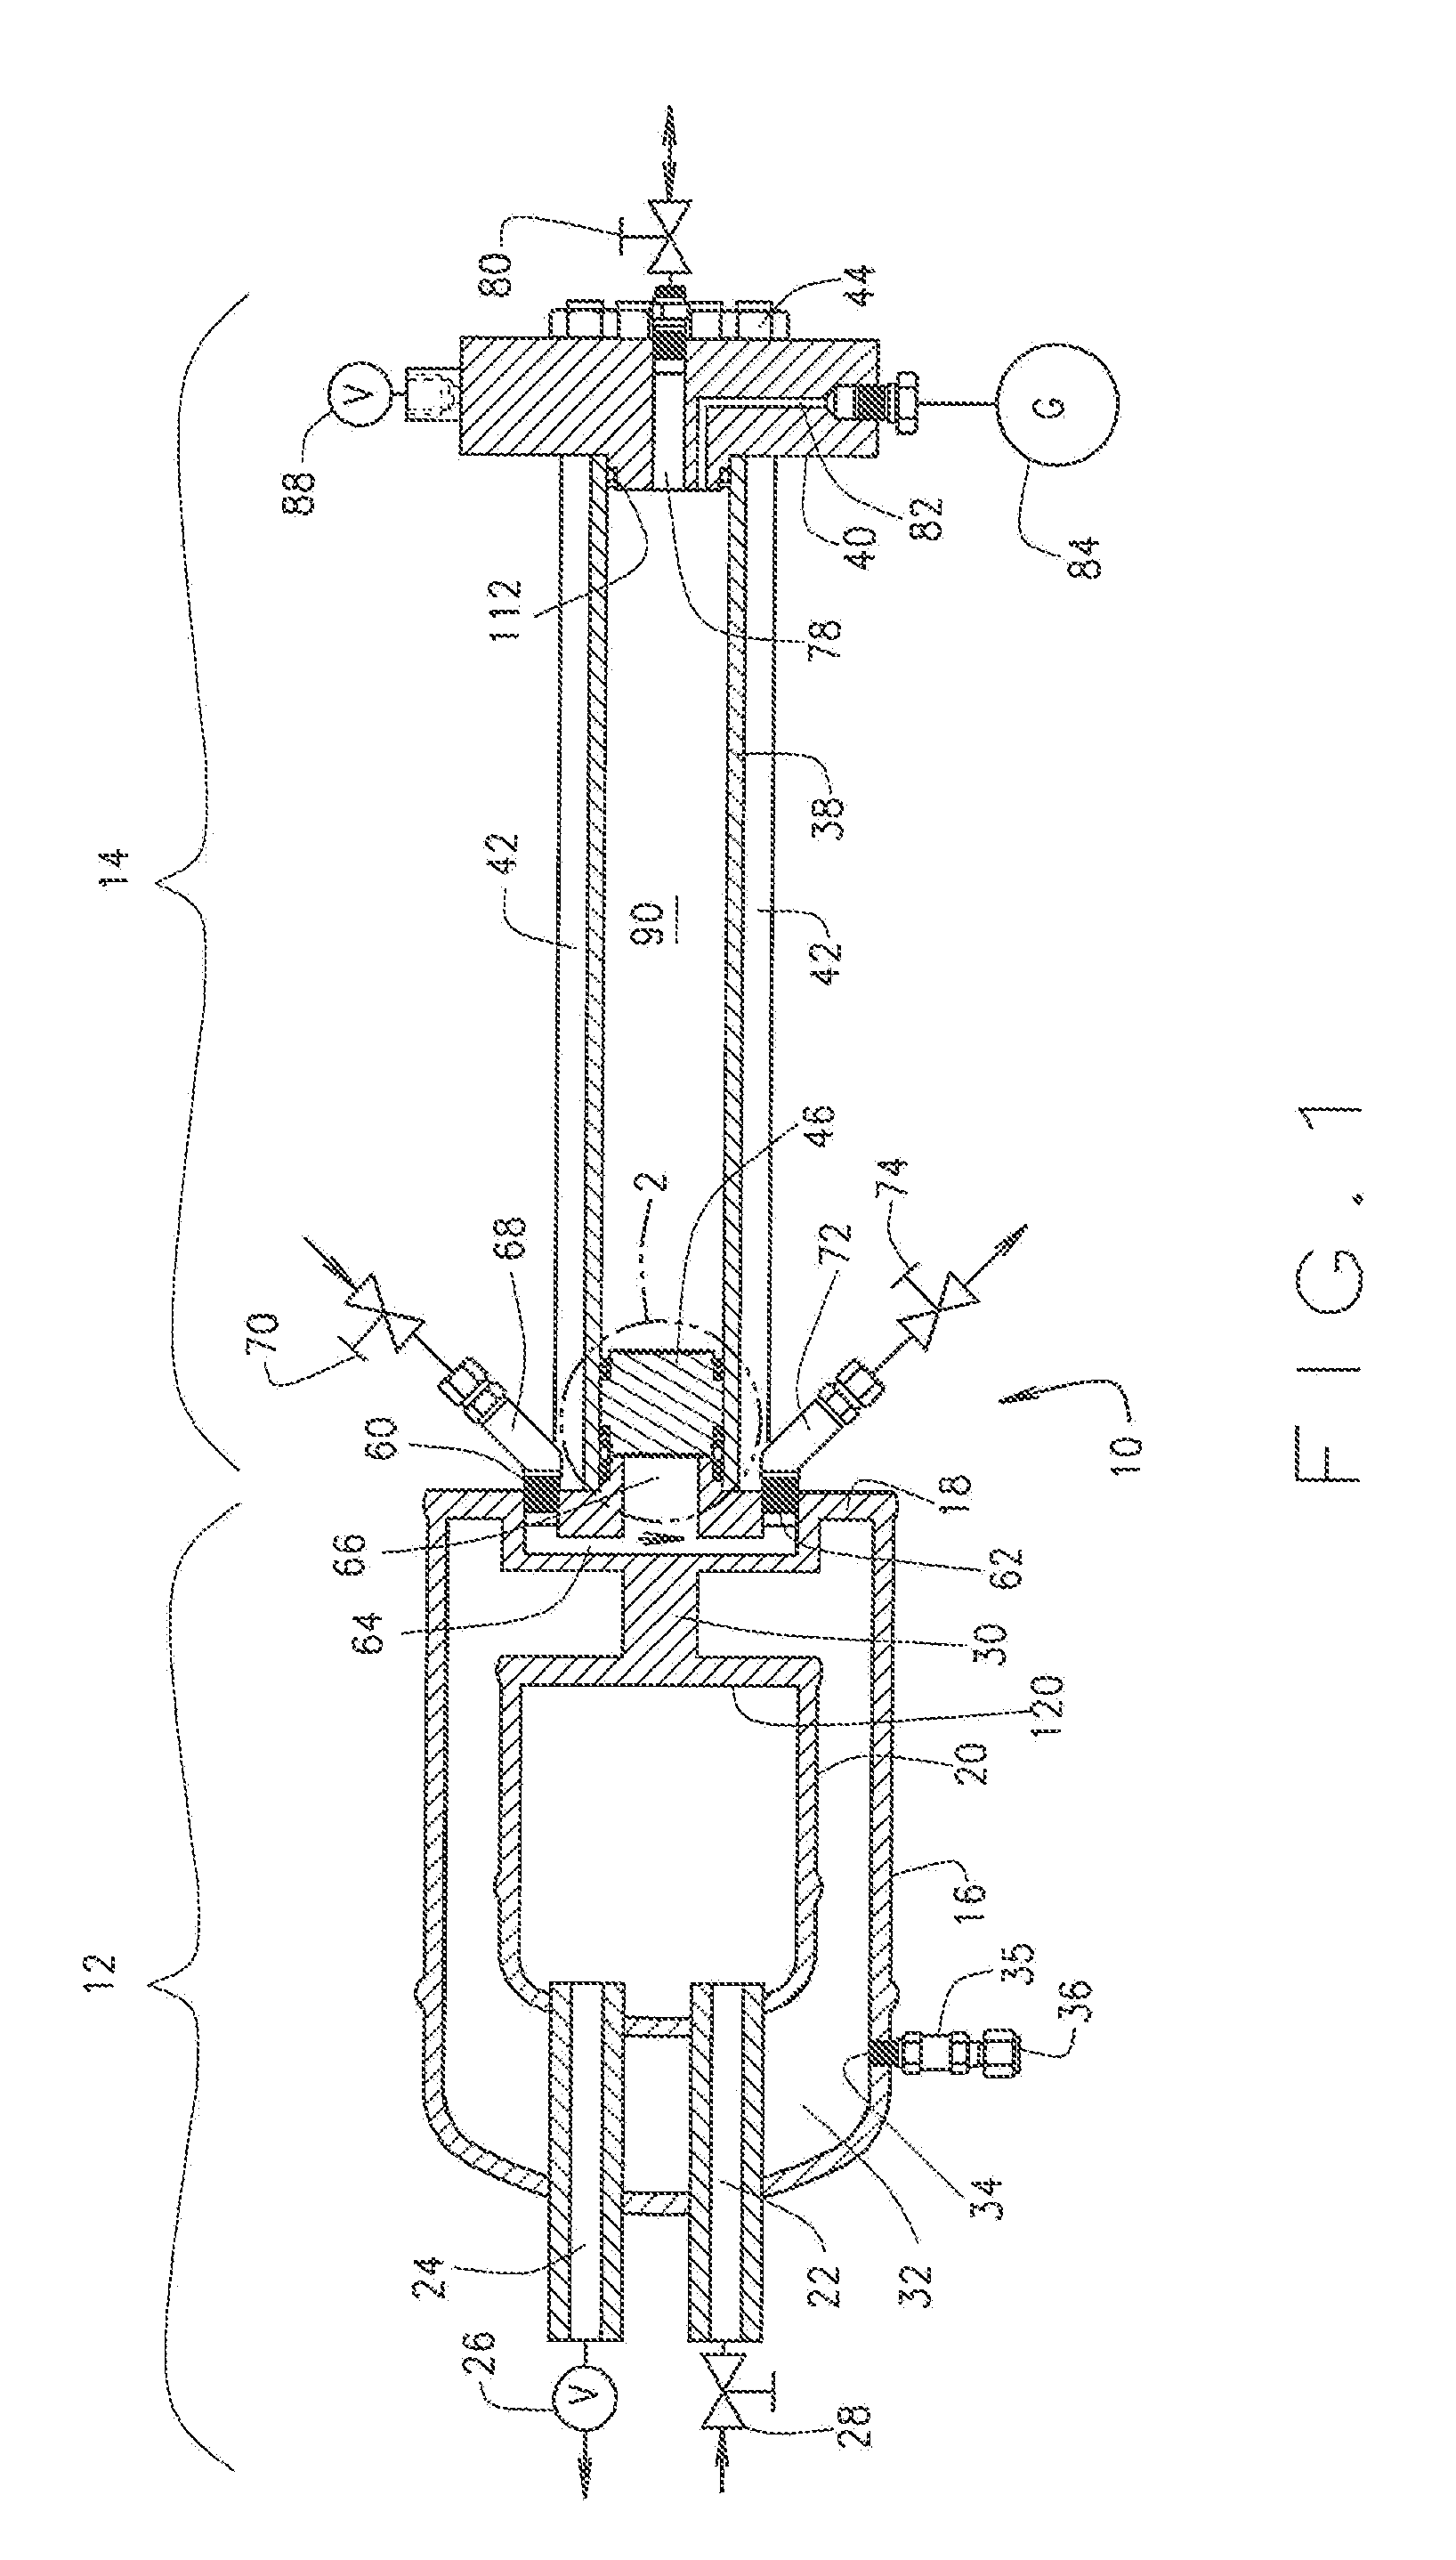 Transportable liquid phase LNG sample apparatus and method